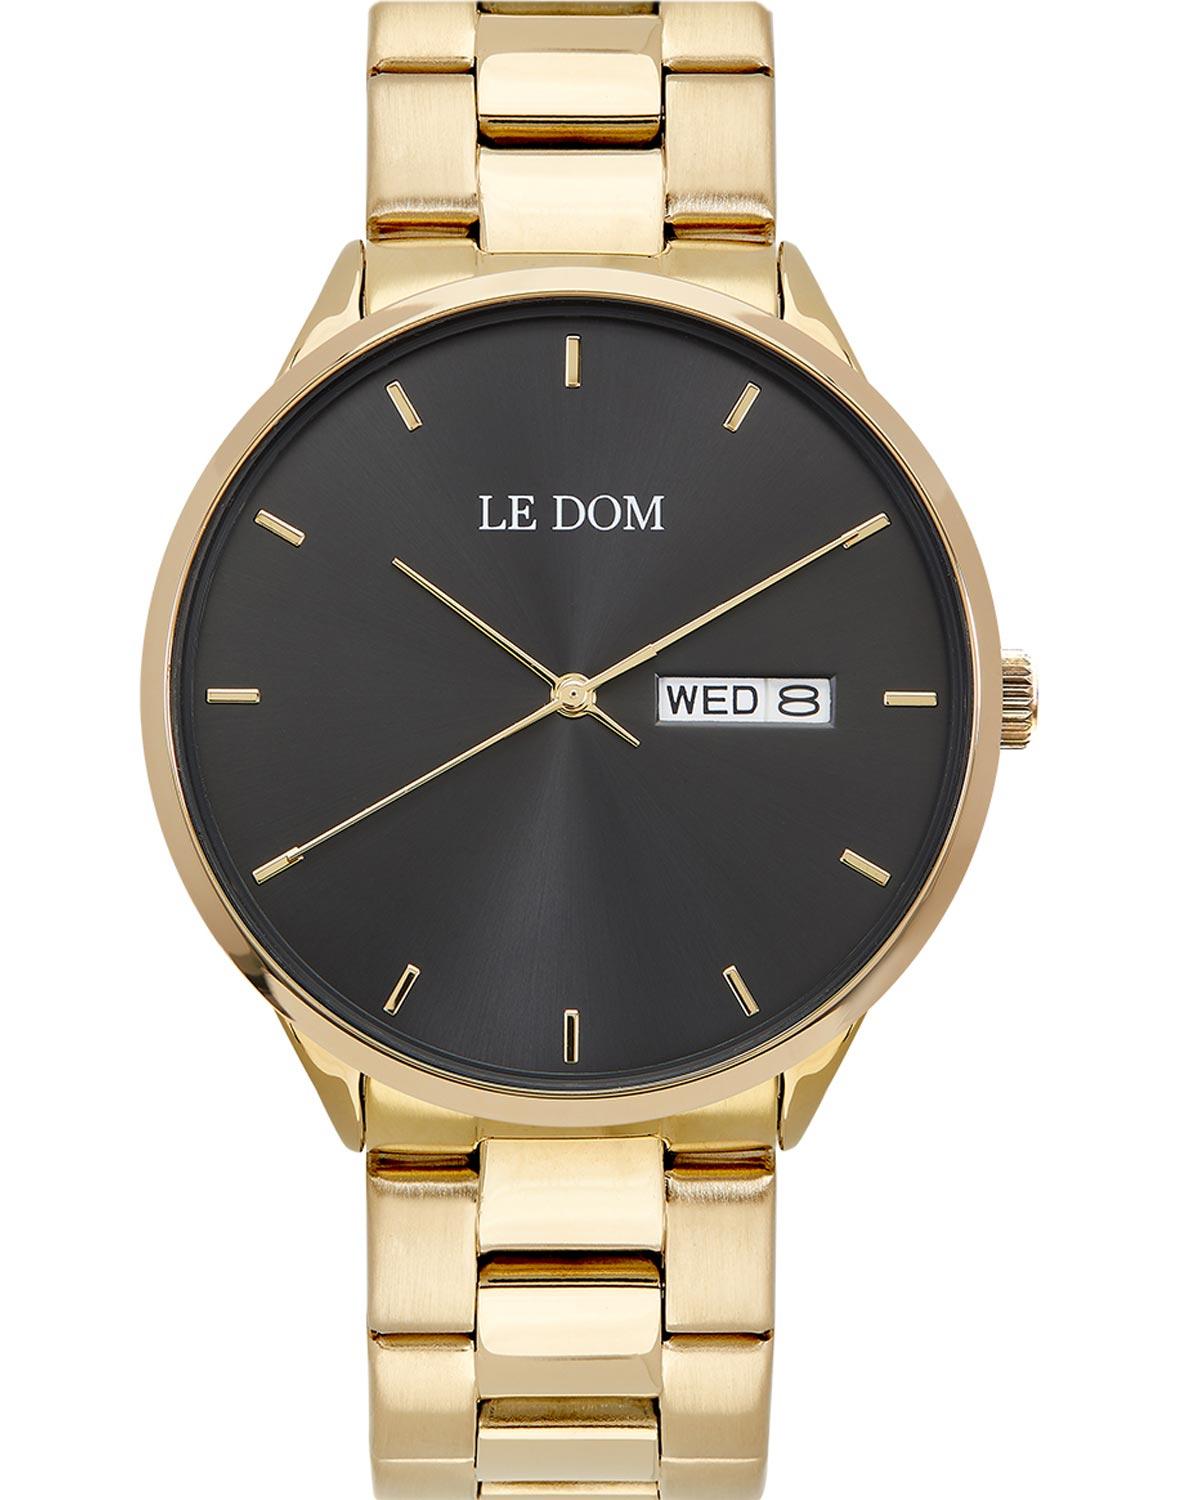 le dom maxim ld 1435 3 gold case with stainless steel bracelet image1